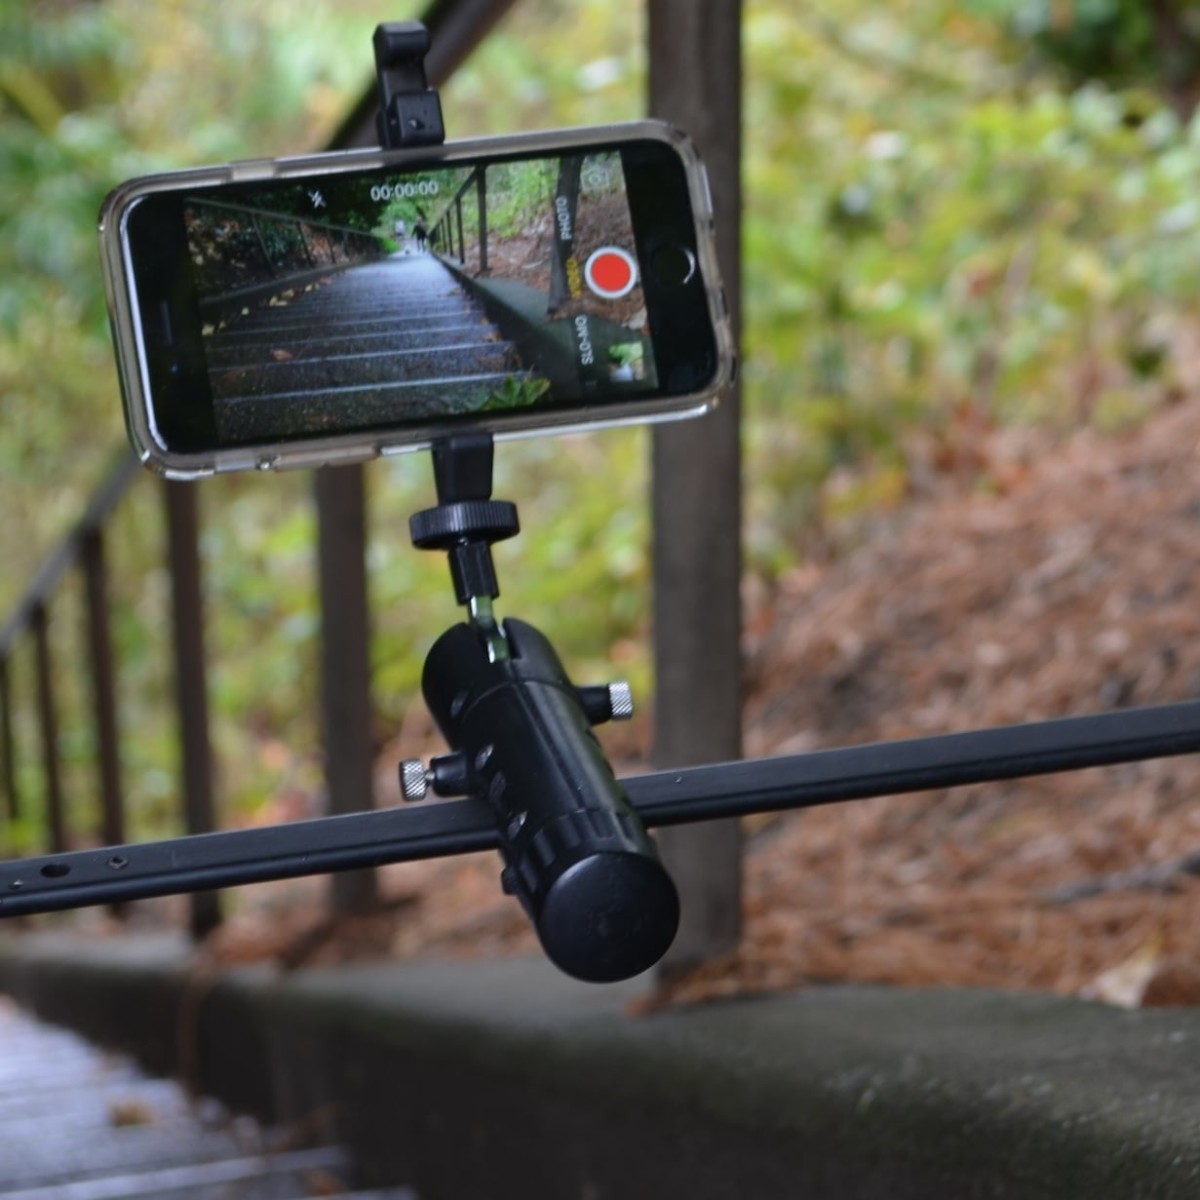 PiggyBack Flexible Camera Support System is a compact mounting system you can use anywhere